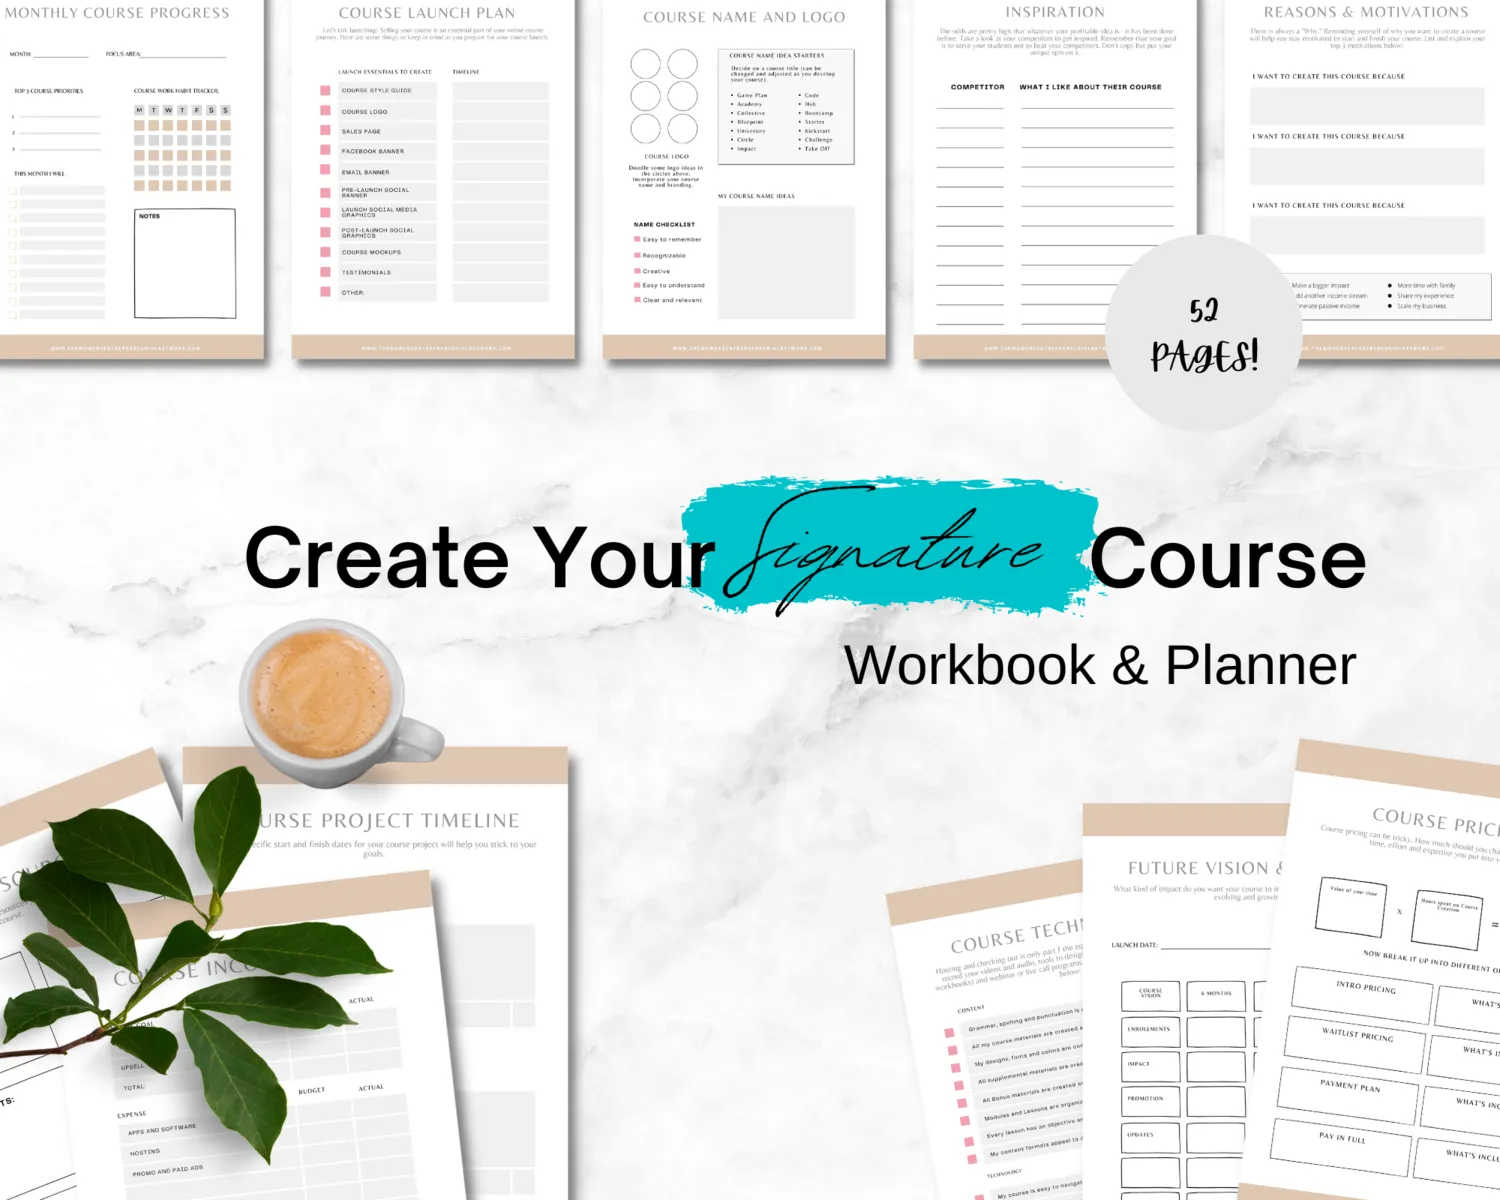 Irresistible Online Course Creation Workbook, Planner, and Sales Funnel Guide